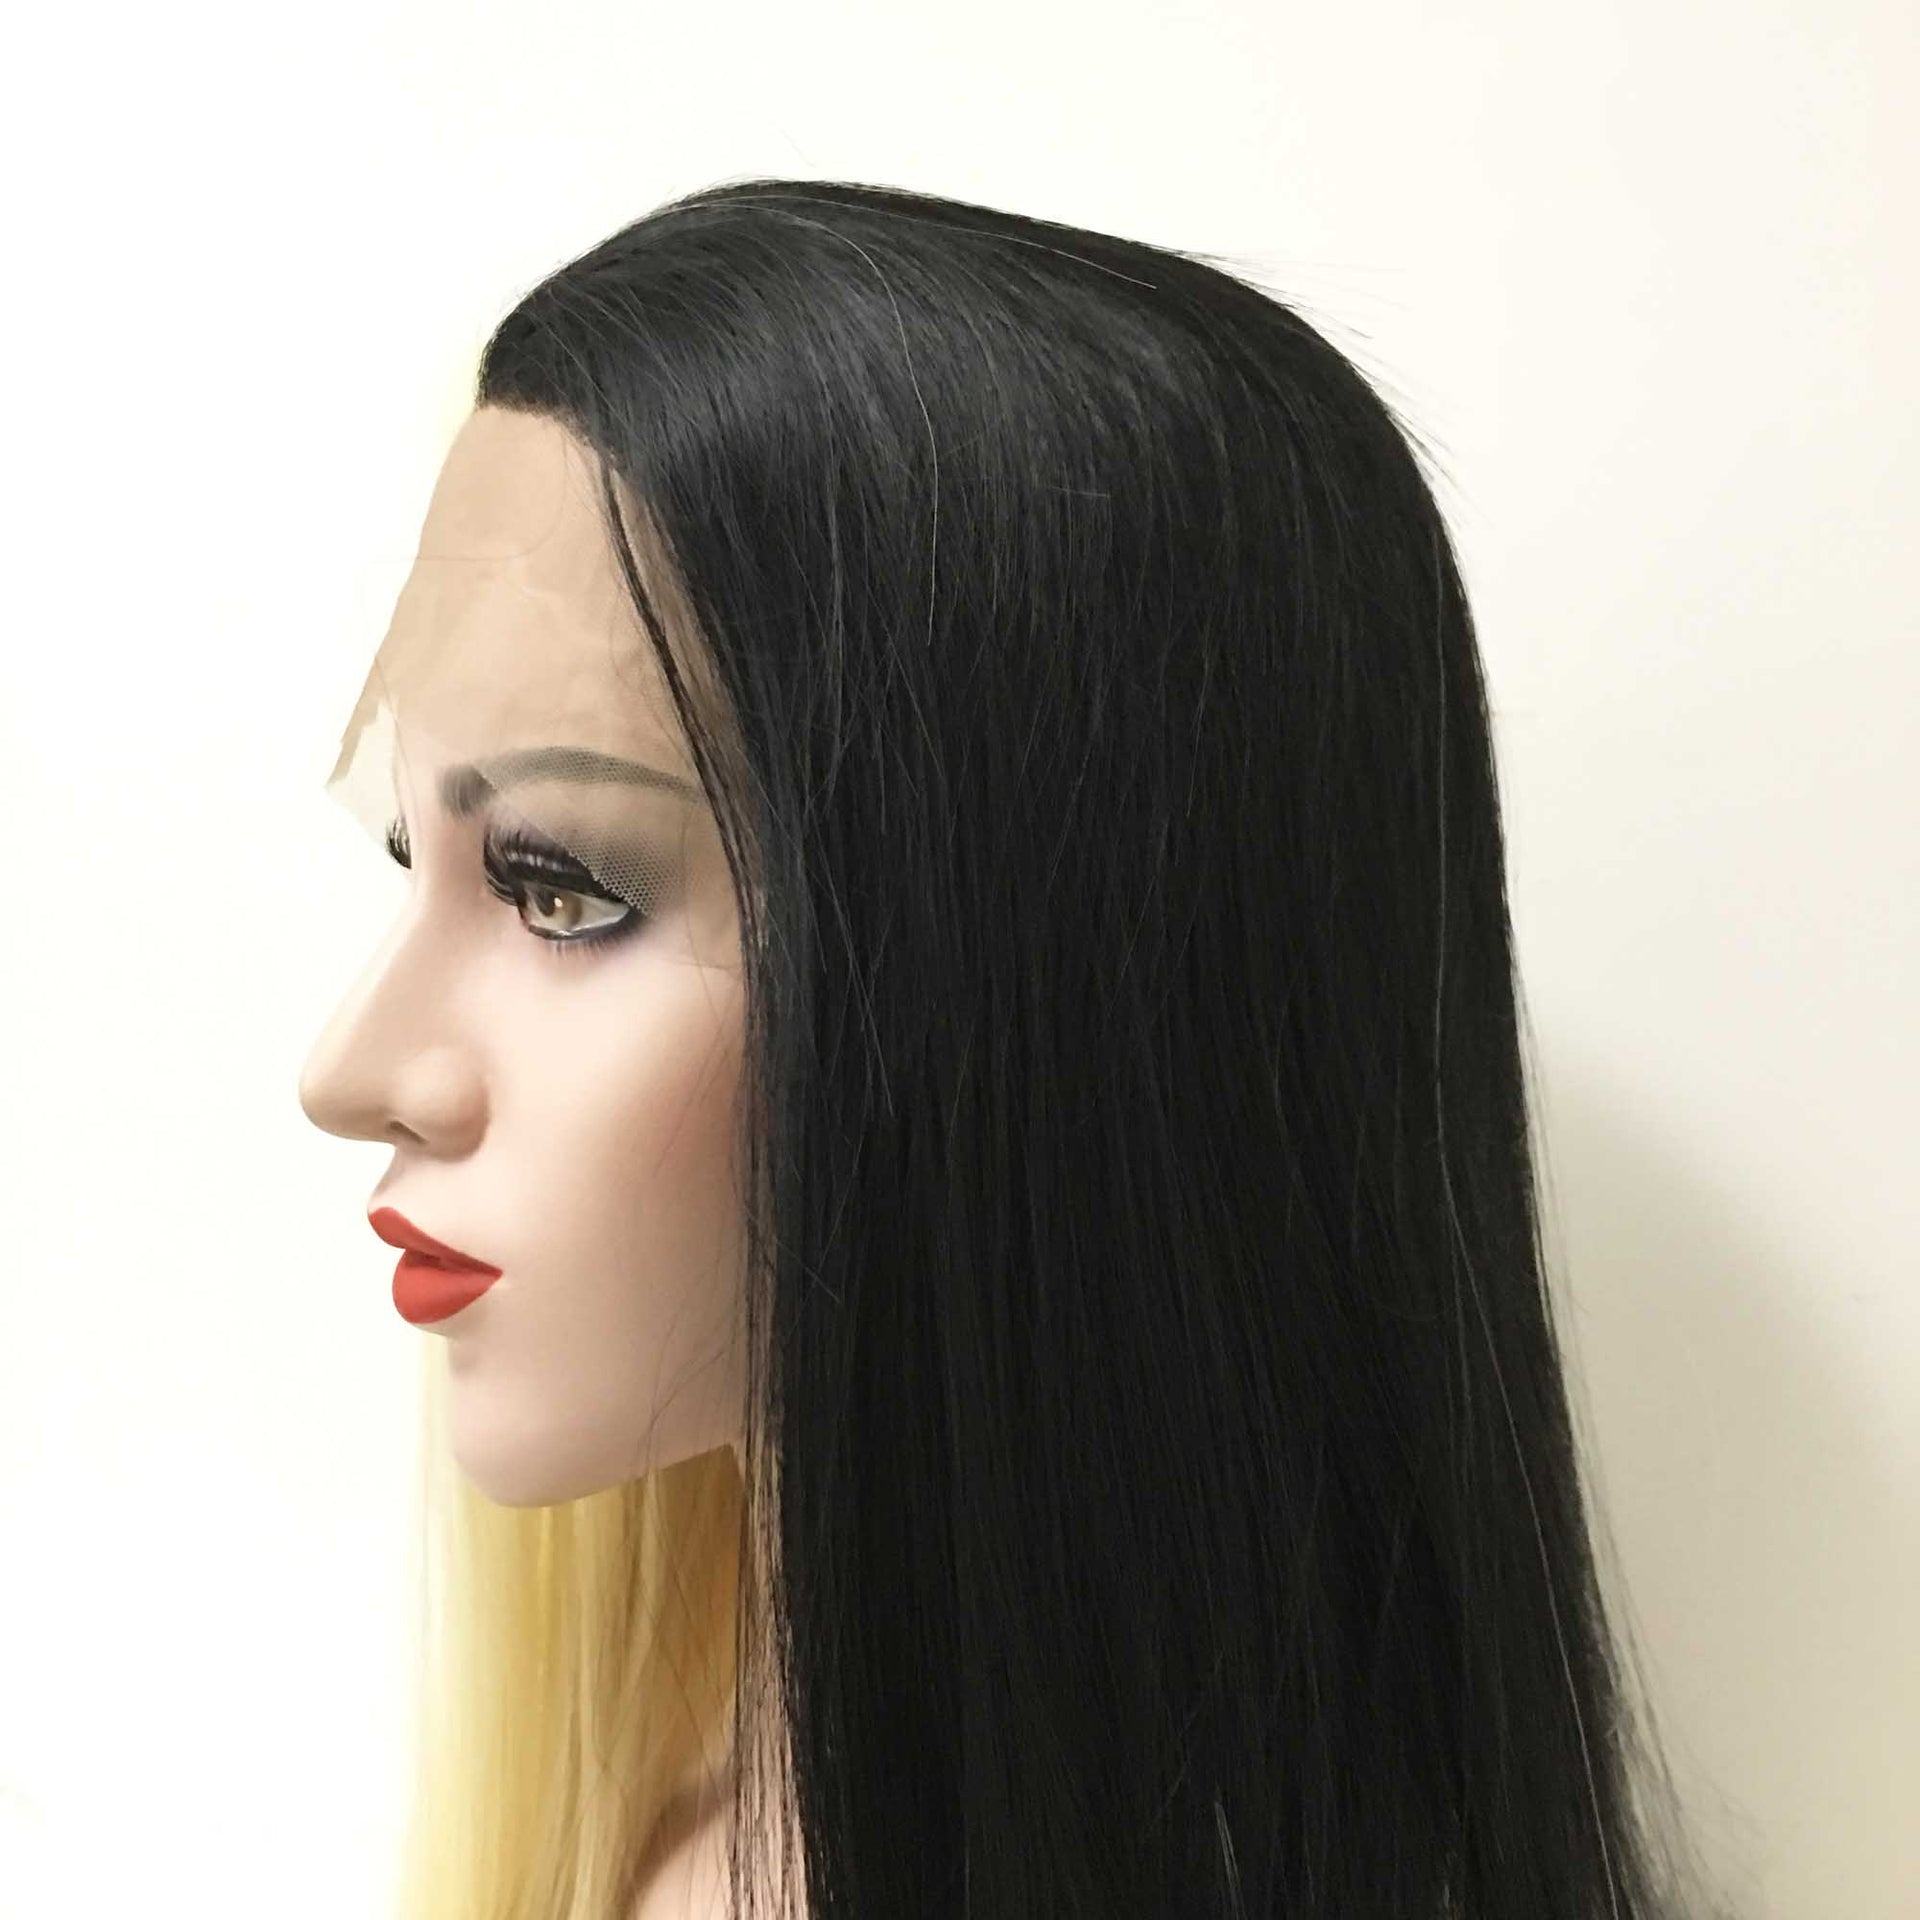 nevermindyrhead Women Lace Front Black Blonde Two Tone Middle Part Long Straight Hair Cosplay Party Wig